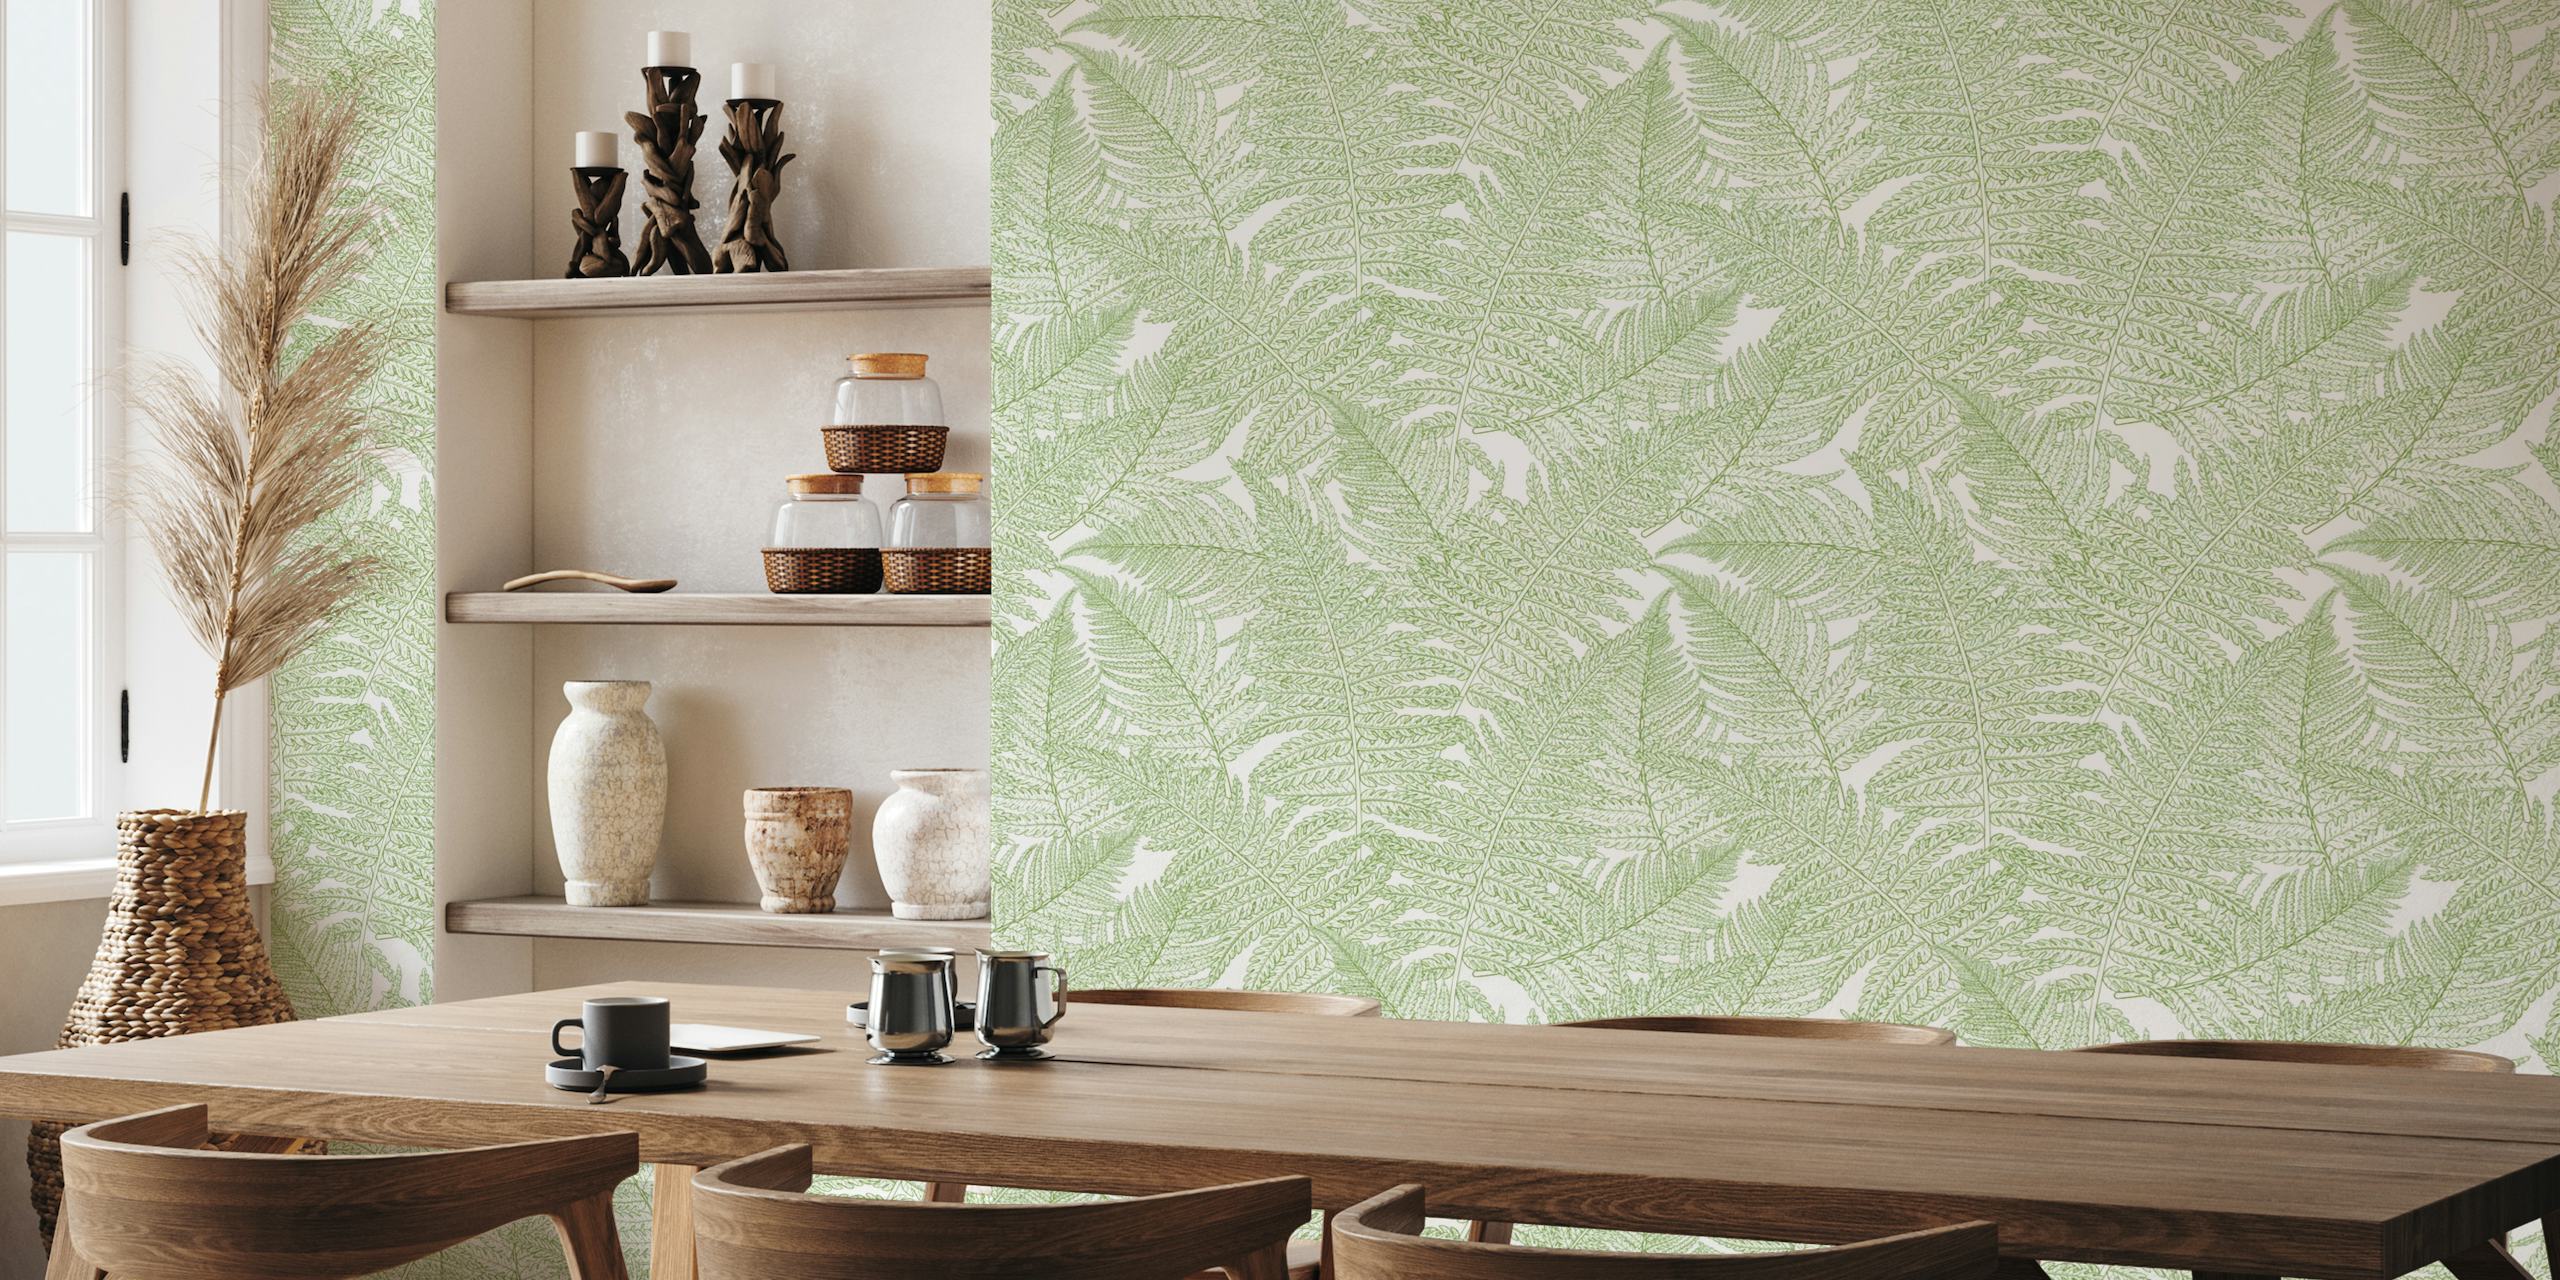 Fern in green and white wallpaper